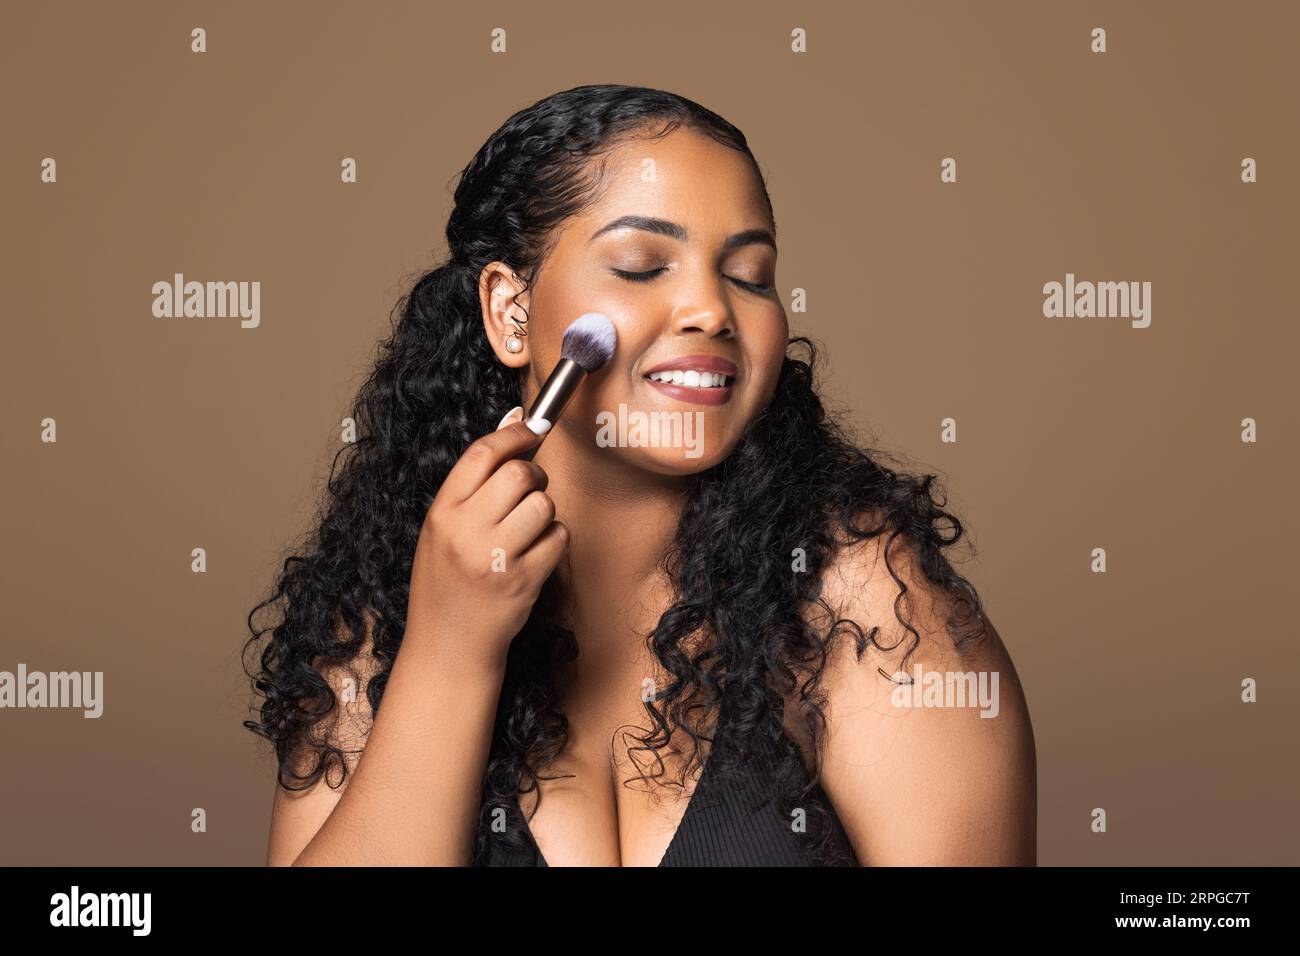 Young happy brazilian plus size woman doing contouring apply blush or highlighter on cheeks with makeup brush Stock Photo